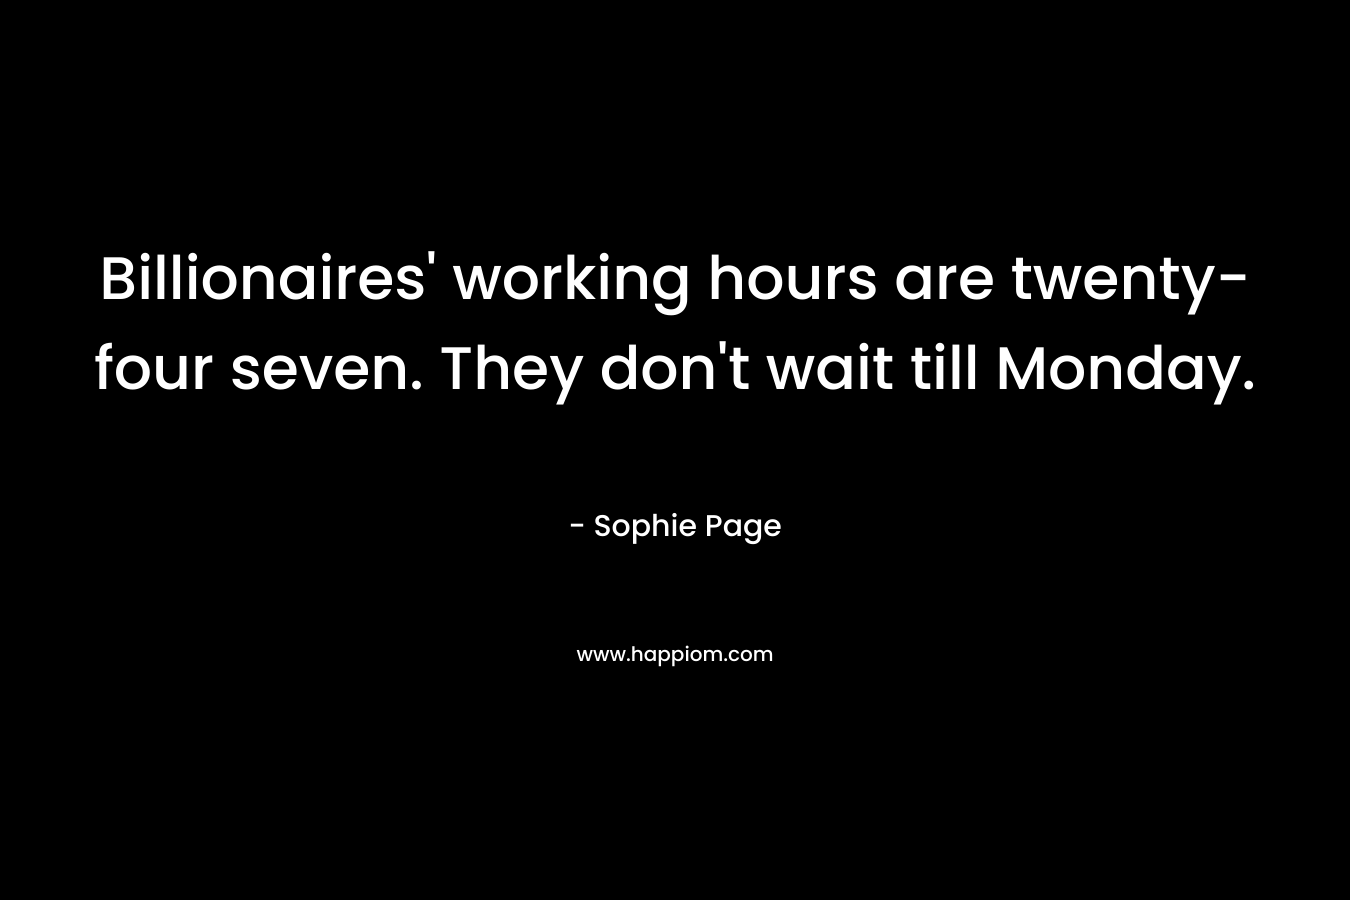 Billionaires’ working hours are twenty-four seven. They don’t wait till Monday. – Sophie Page